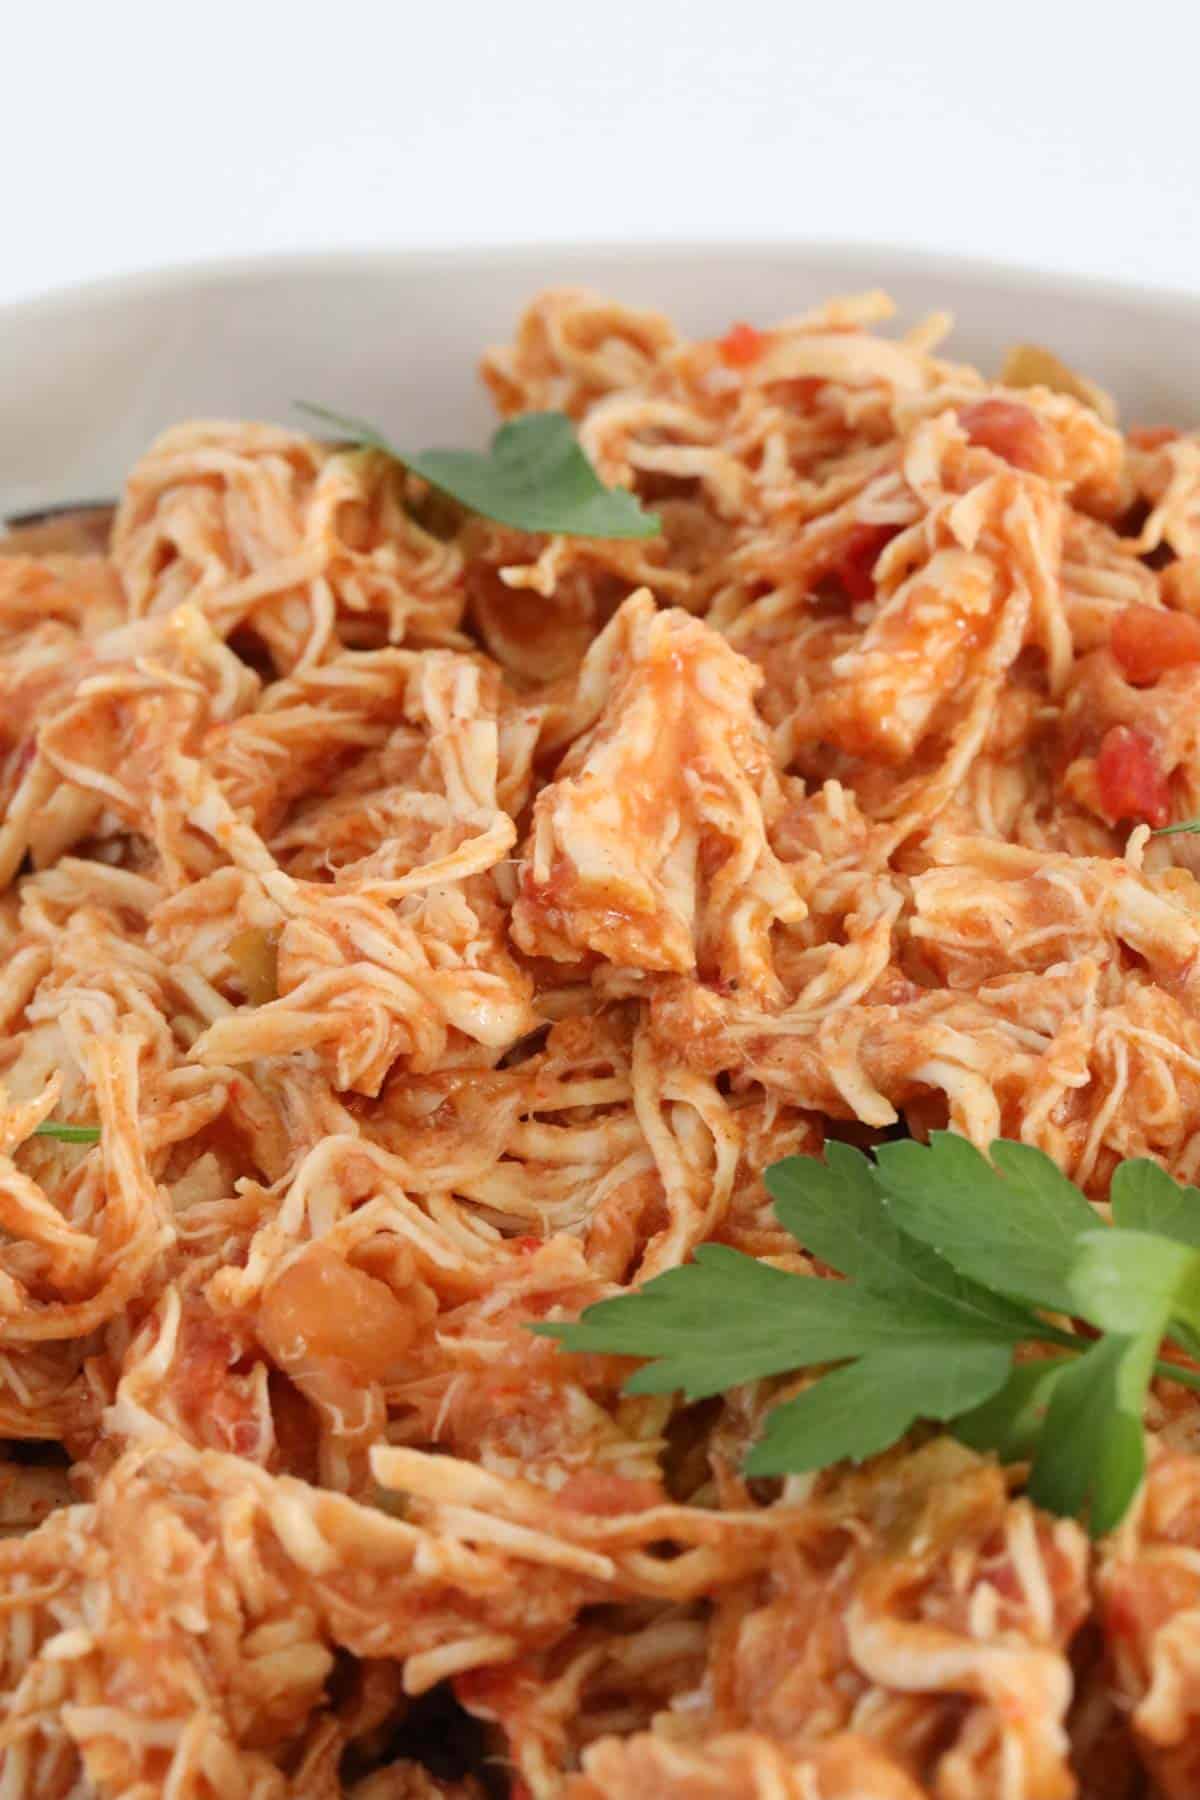 Finely shredded chicken meat in a tomato based sauce.